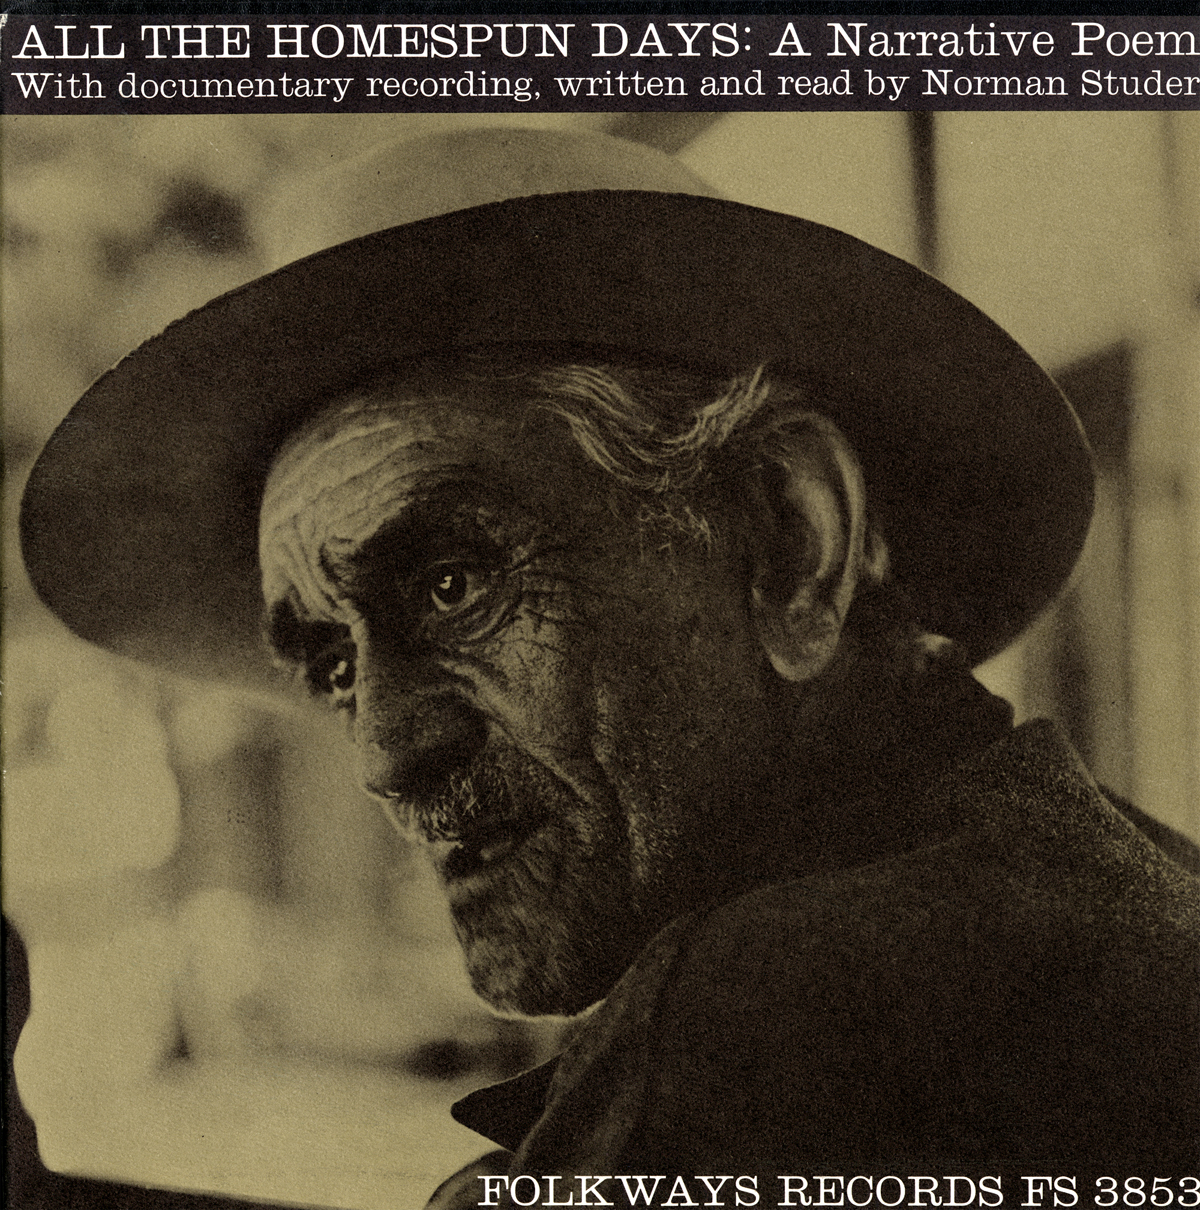 ALL THE HOMESPUN DAYS: A NARRATIVE POEM OF NEW YOR